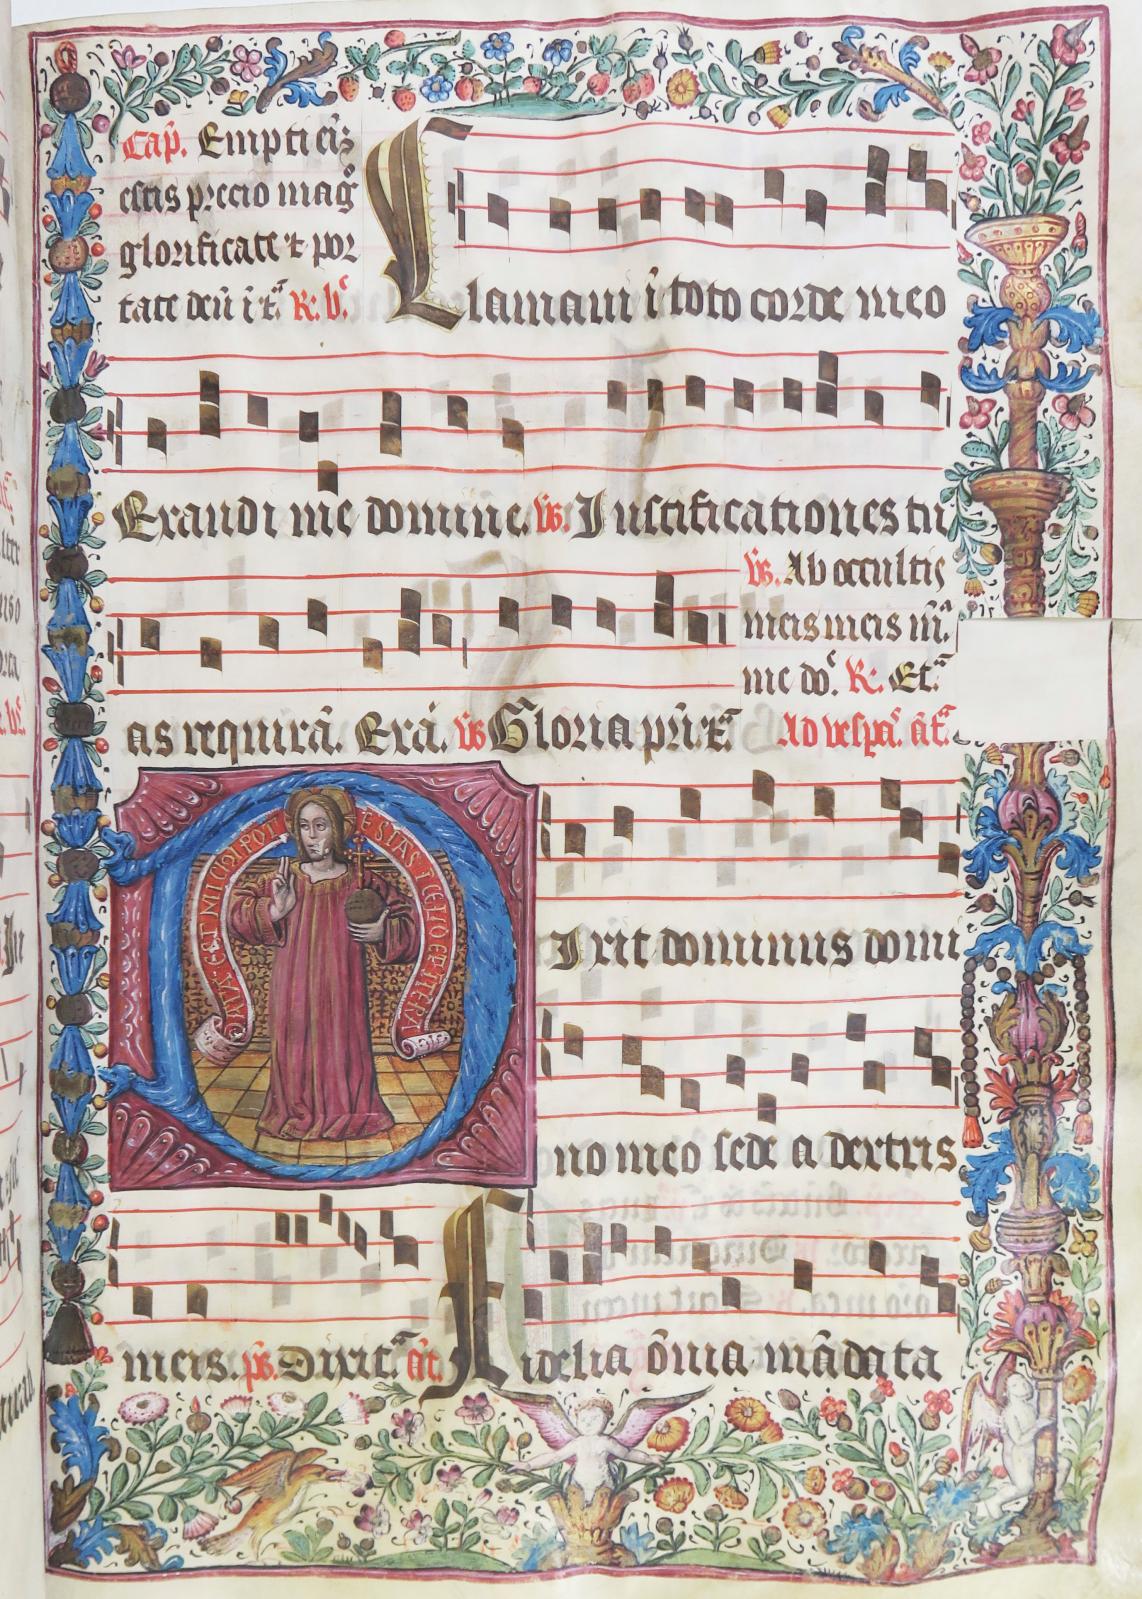 Hymns from a Fifteenth-Century Antiphonary